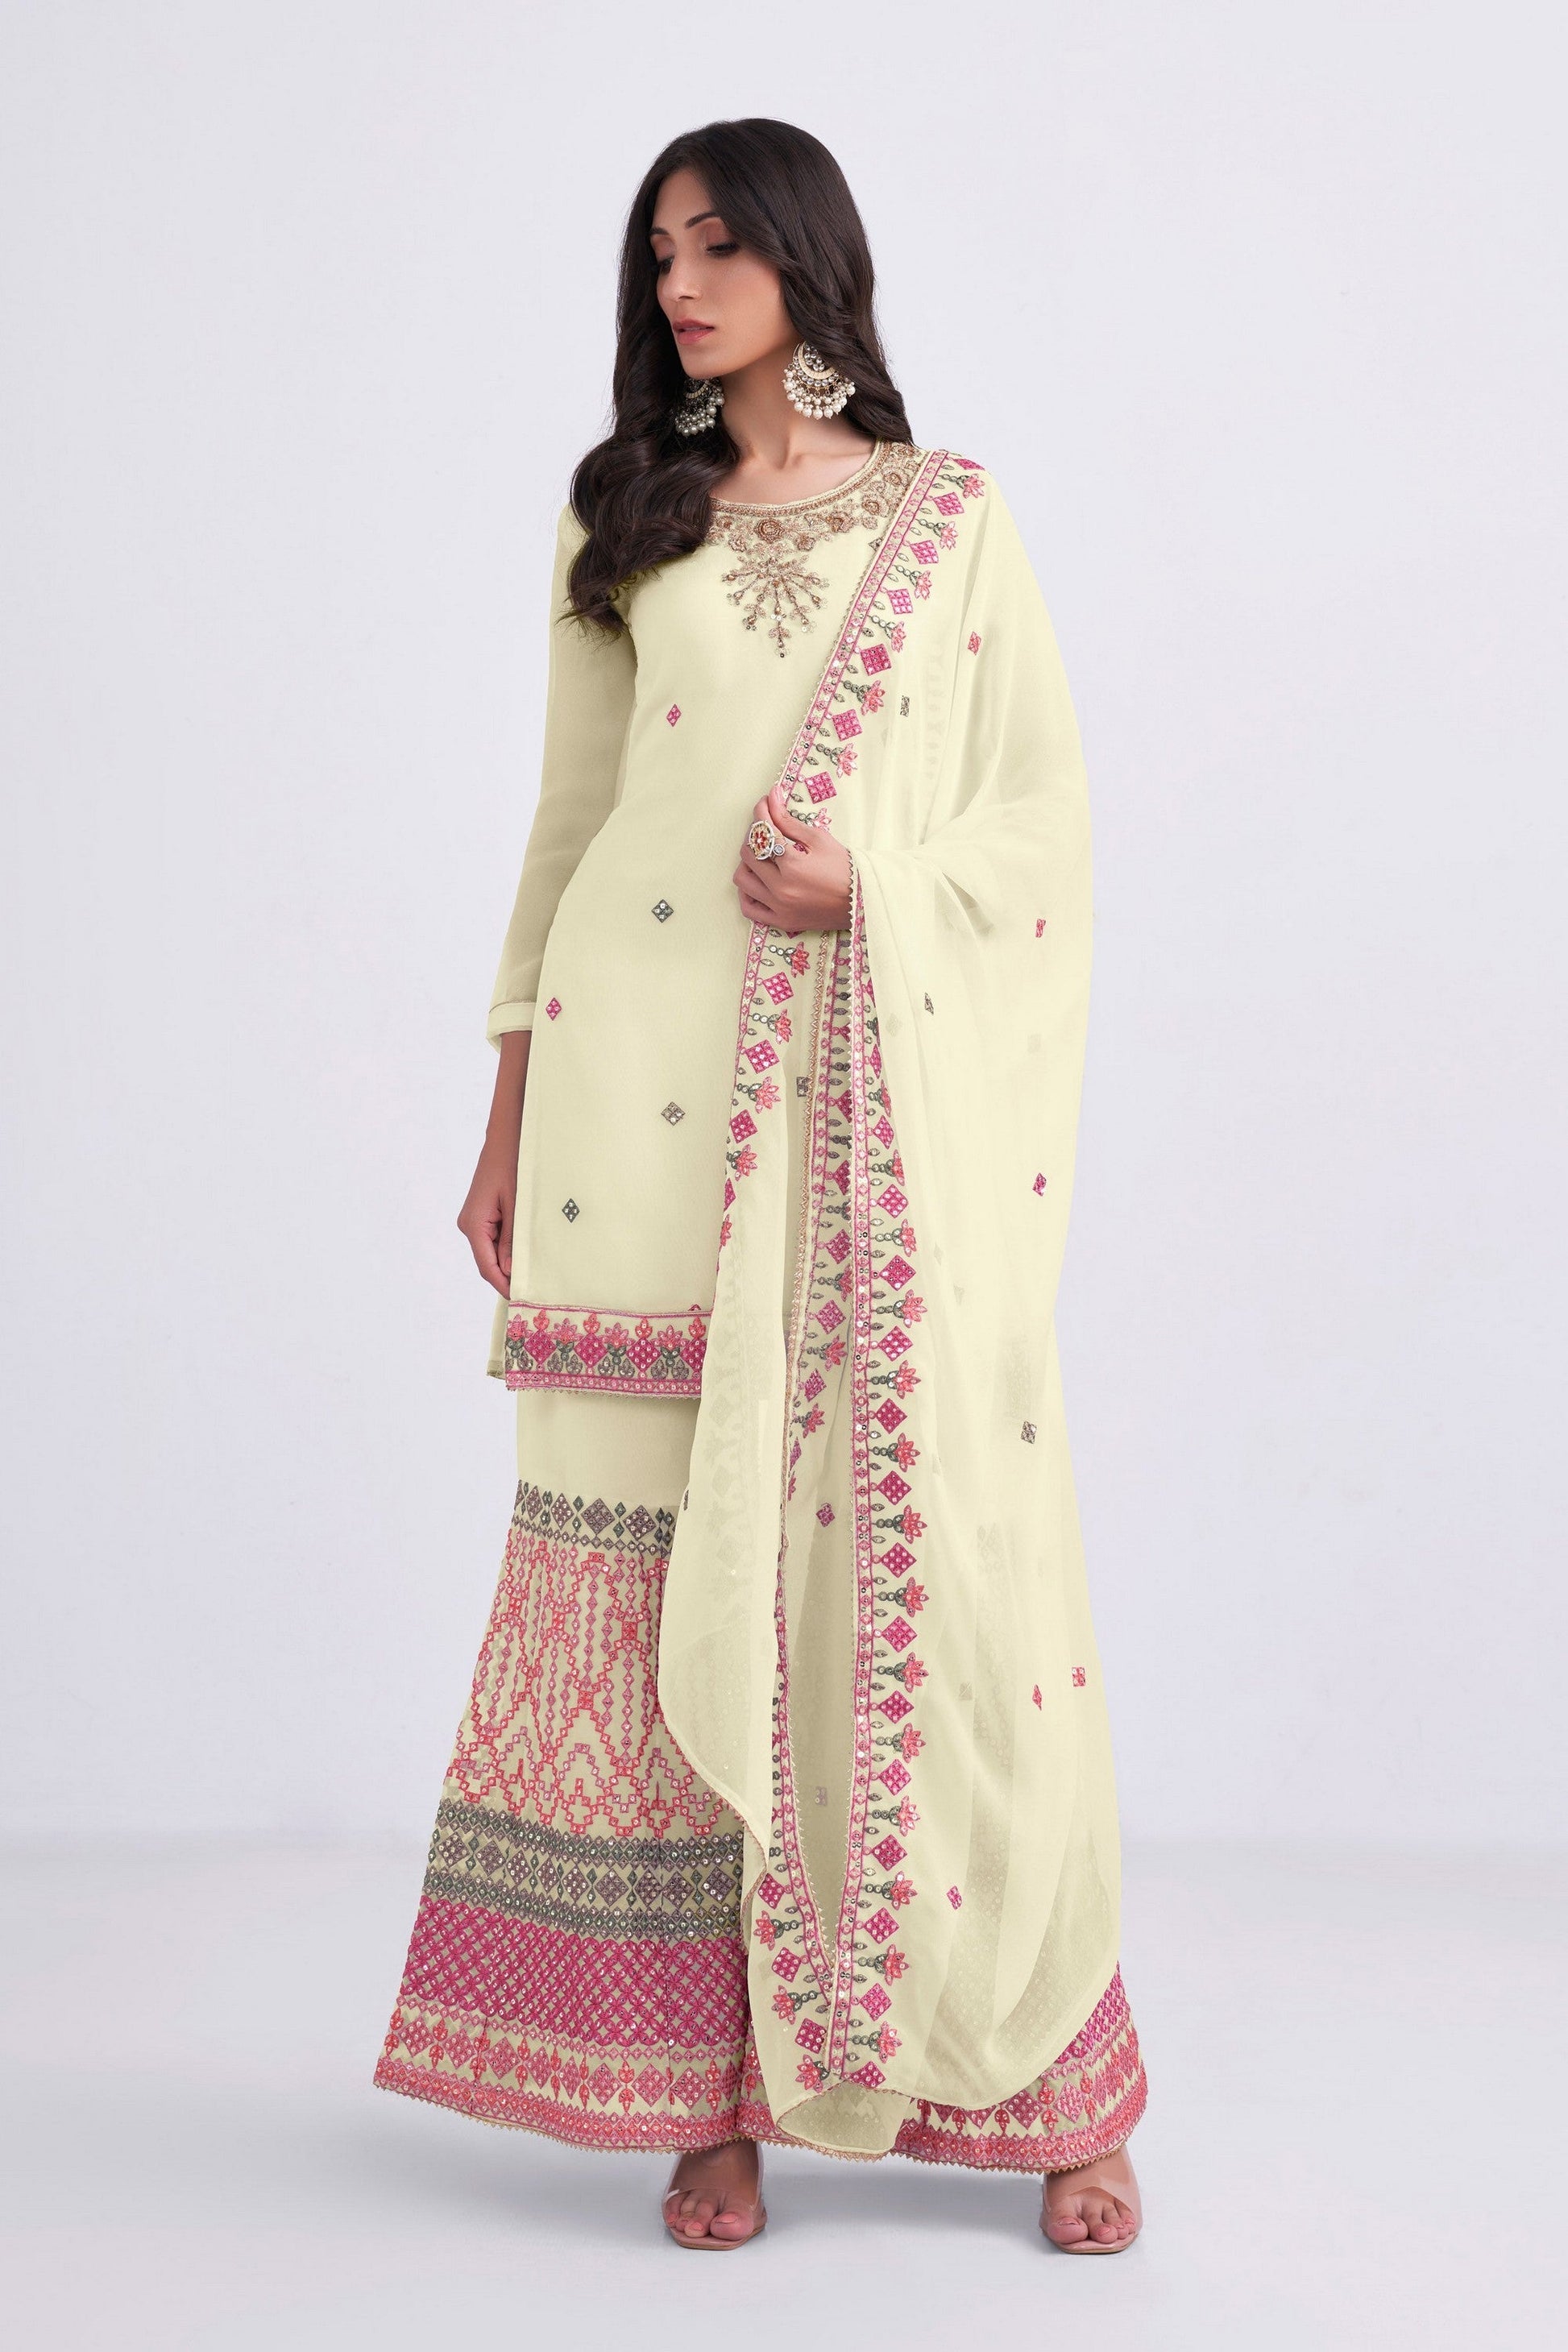 Light Yellow Pakistani Georgette Sharara For Indian Festivals & Weddings - Sequence Embroidery Work, Thread Embroidery Work, Khatli Work, Zari Work